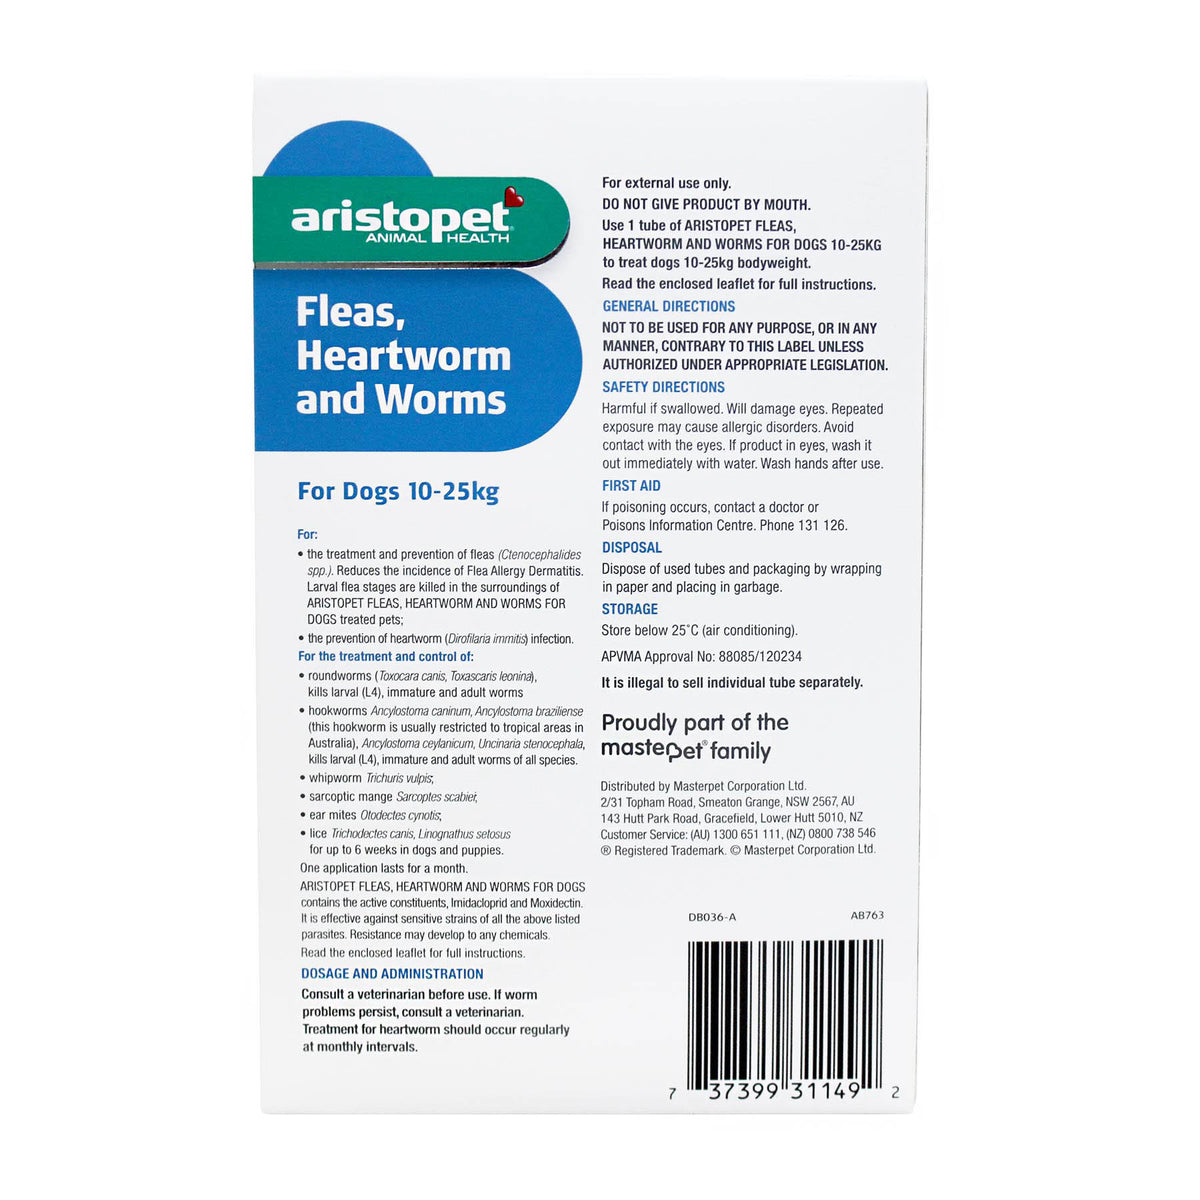 Aristopet Fleas, Heartworm &amp; Worms Spot-on Treatment for Dogs 10-25kg